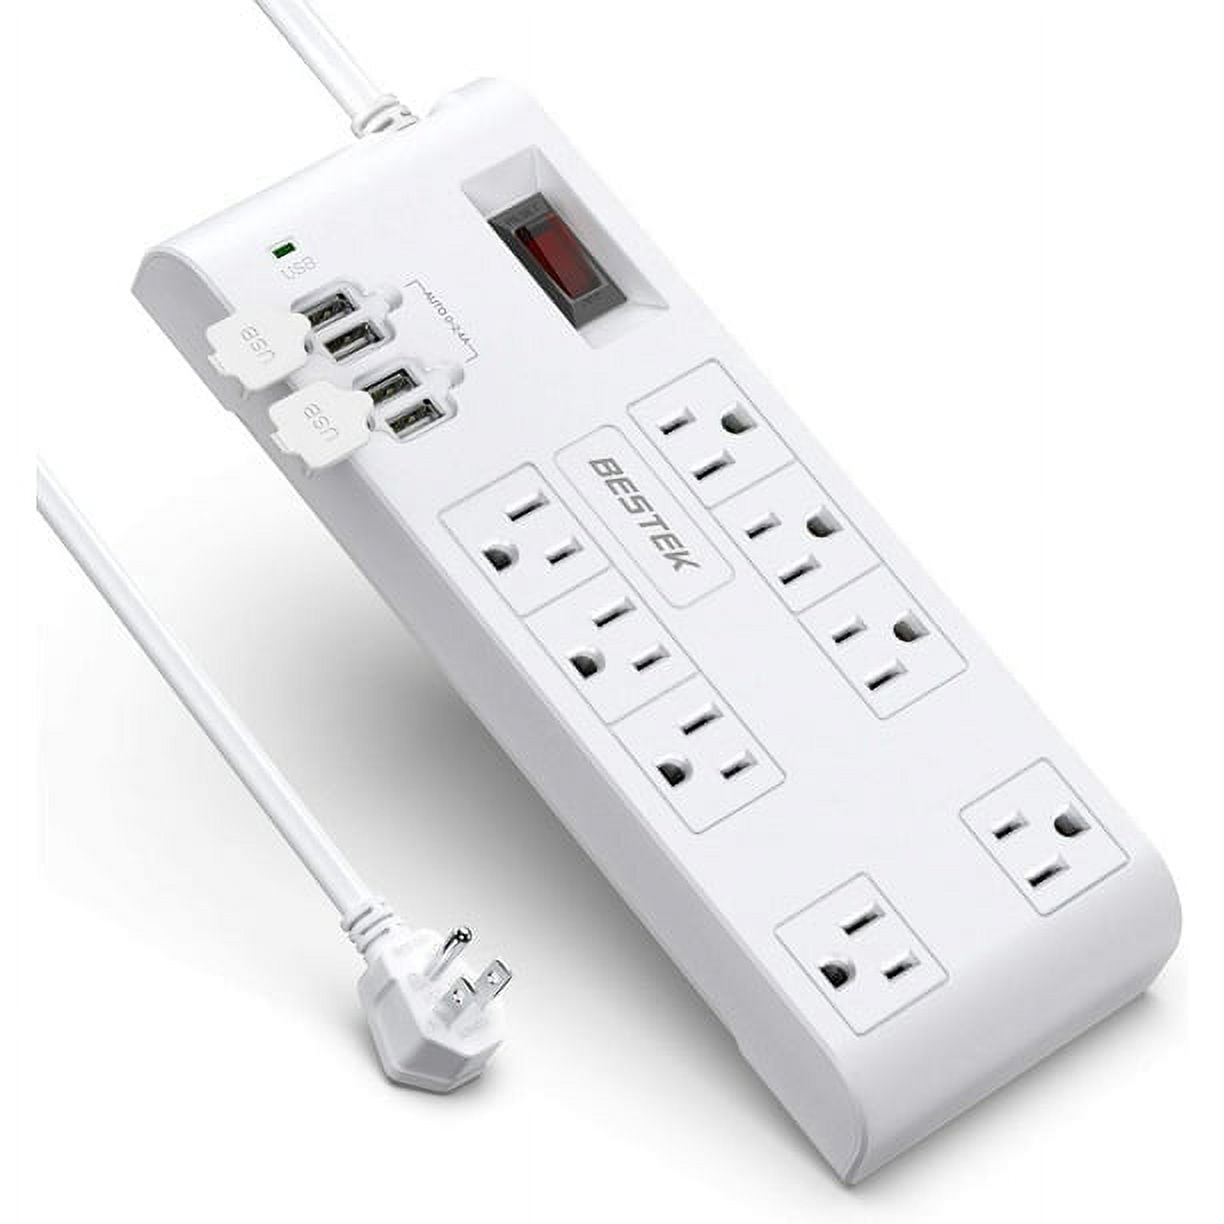 UNISTRIPMP 2-Outlet Portable Power Strip with 4-Port USB 2.0 Hub and  Charger for Travelers